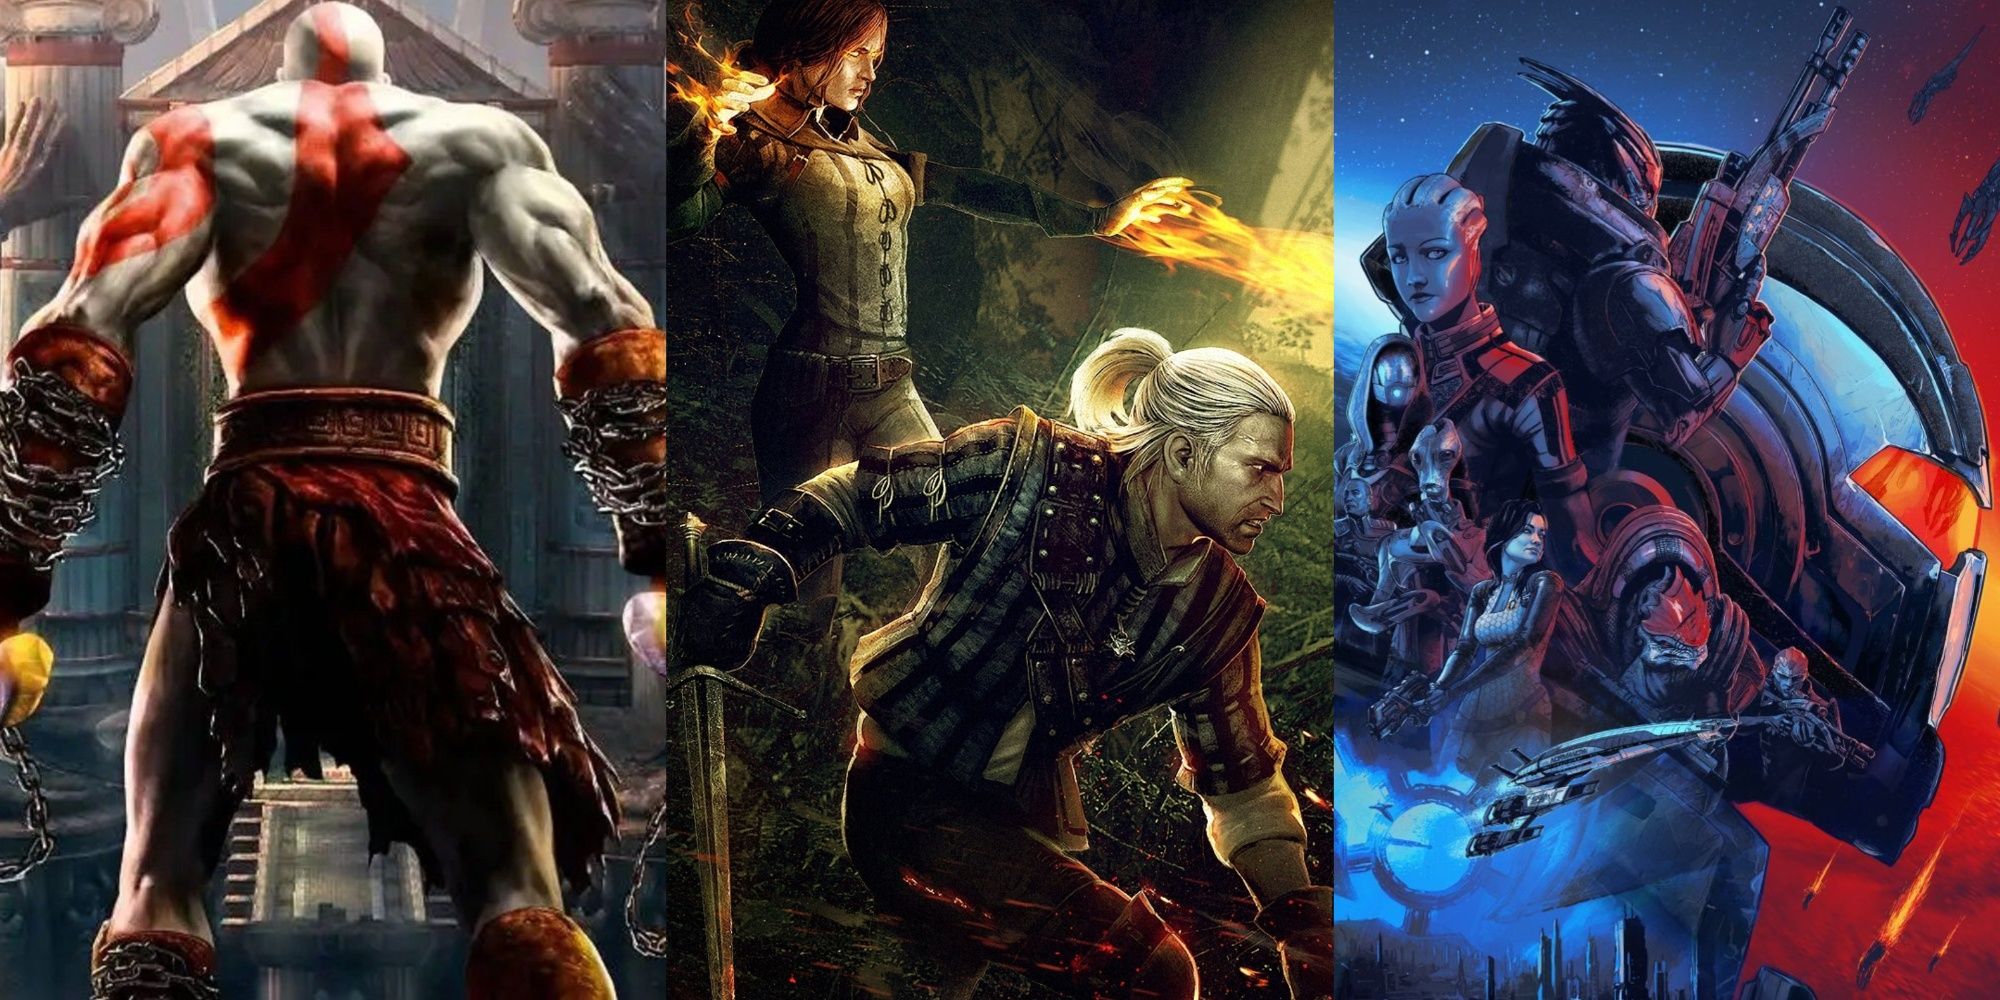 https://static0.thegamerimages.com/wordpress/wp-content/uploads/2023/07/box-art-for-god-of-war-2-and-mass-effect-legendary-edition-and-key-art-for-the-witcher-2.jpg